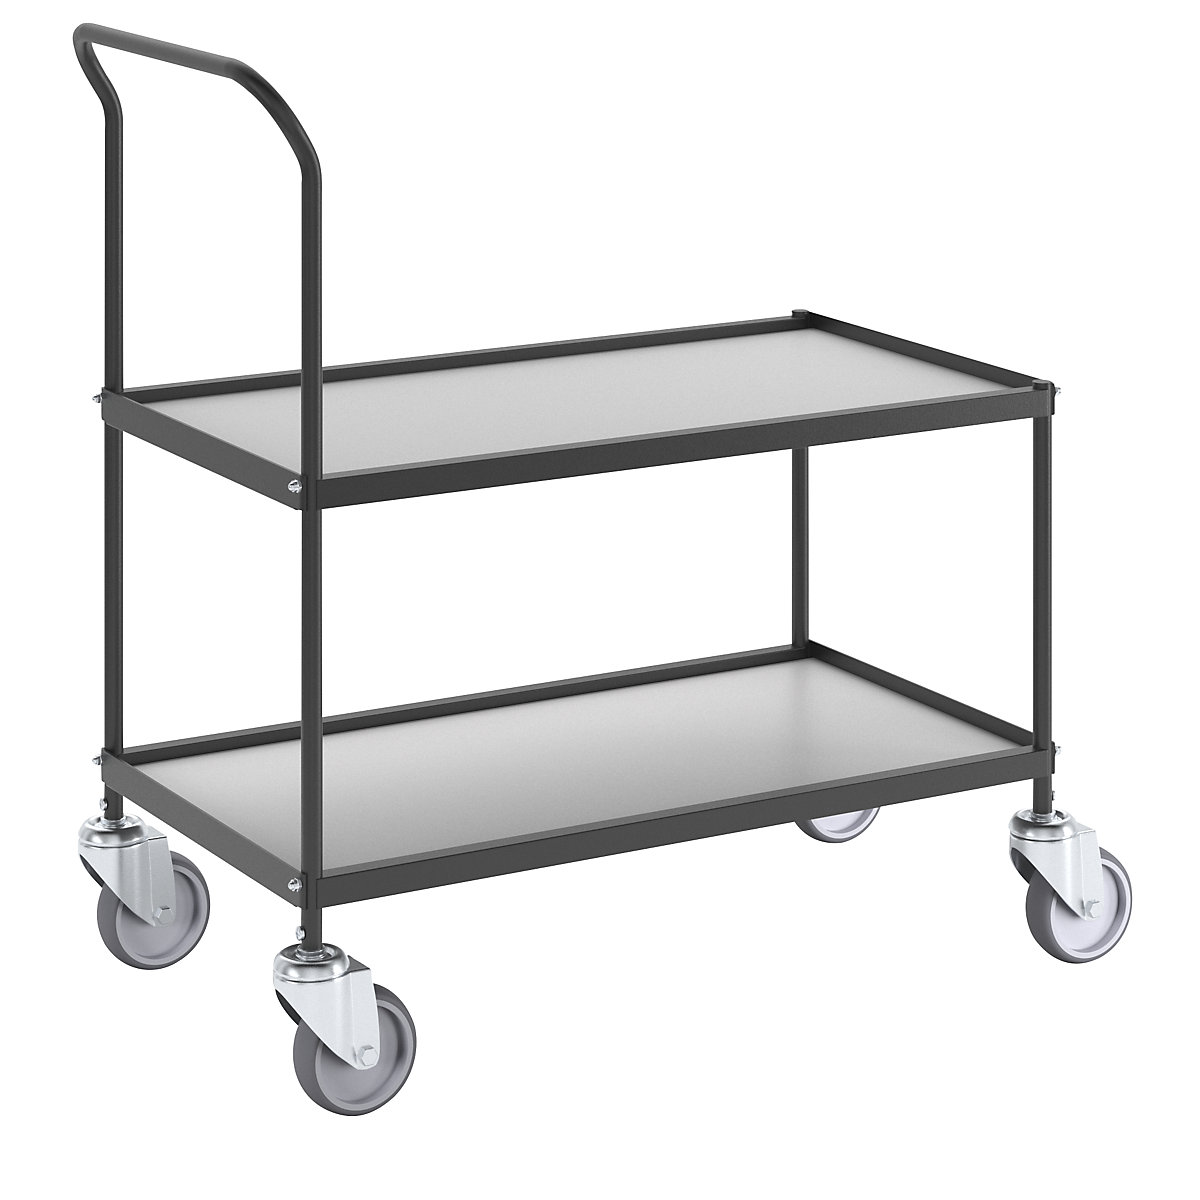 Serving and clearing trolley, 2 shelves, LxWxH 840 x 470 x 960 mm-11